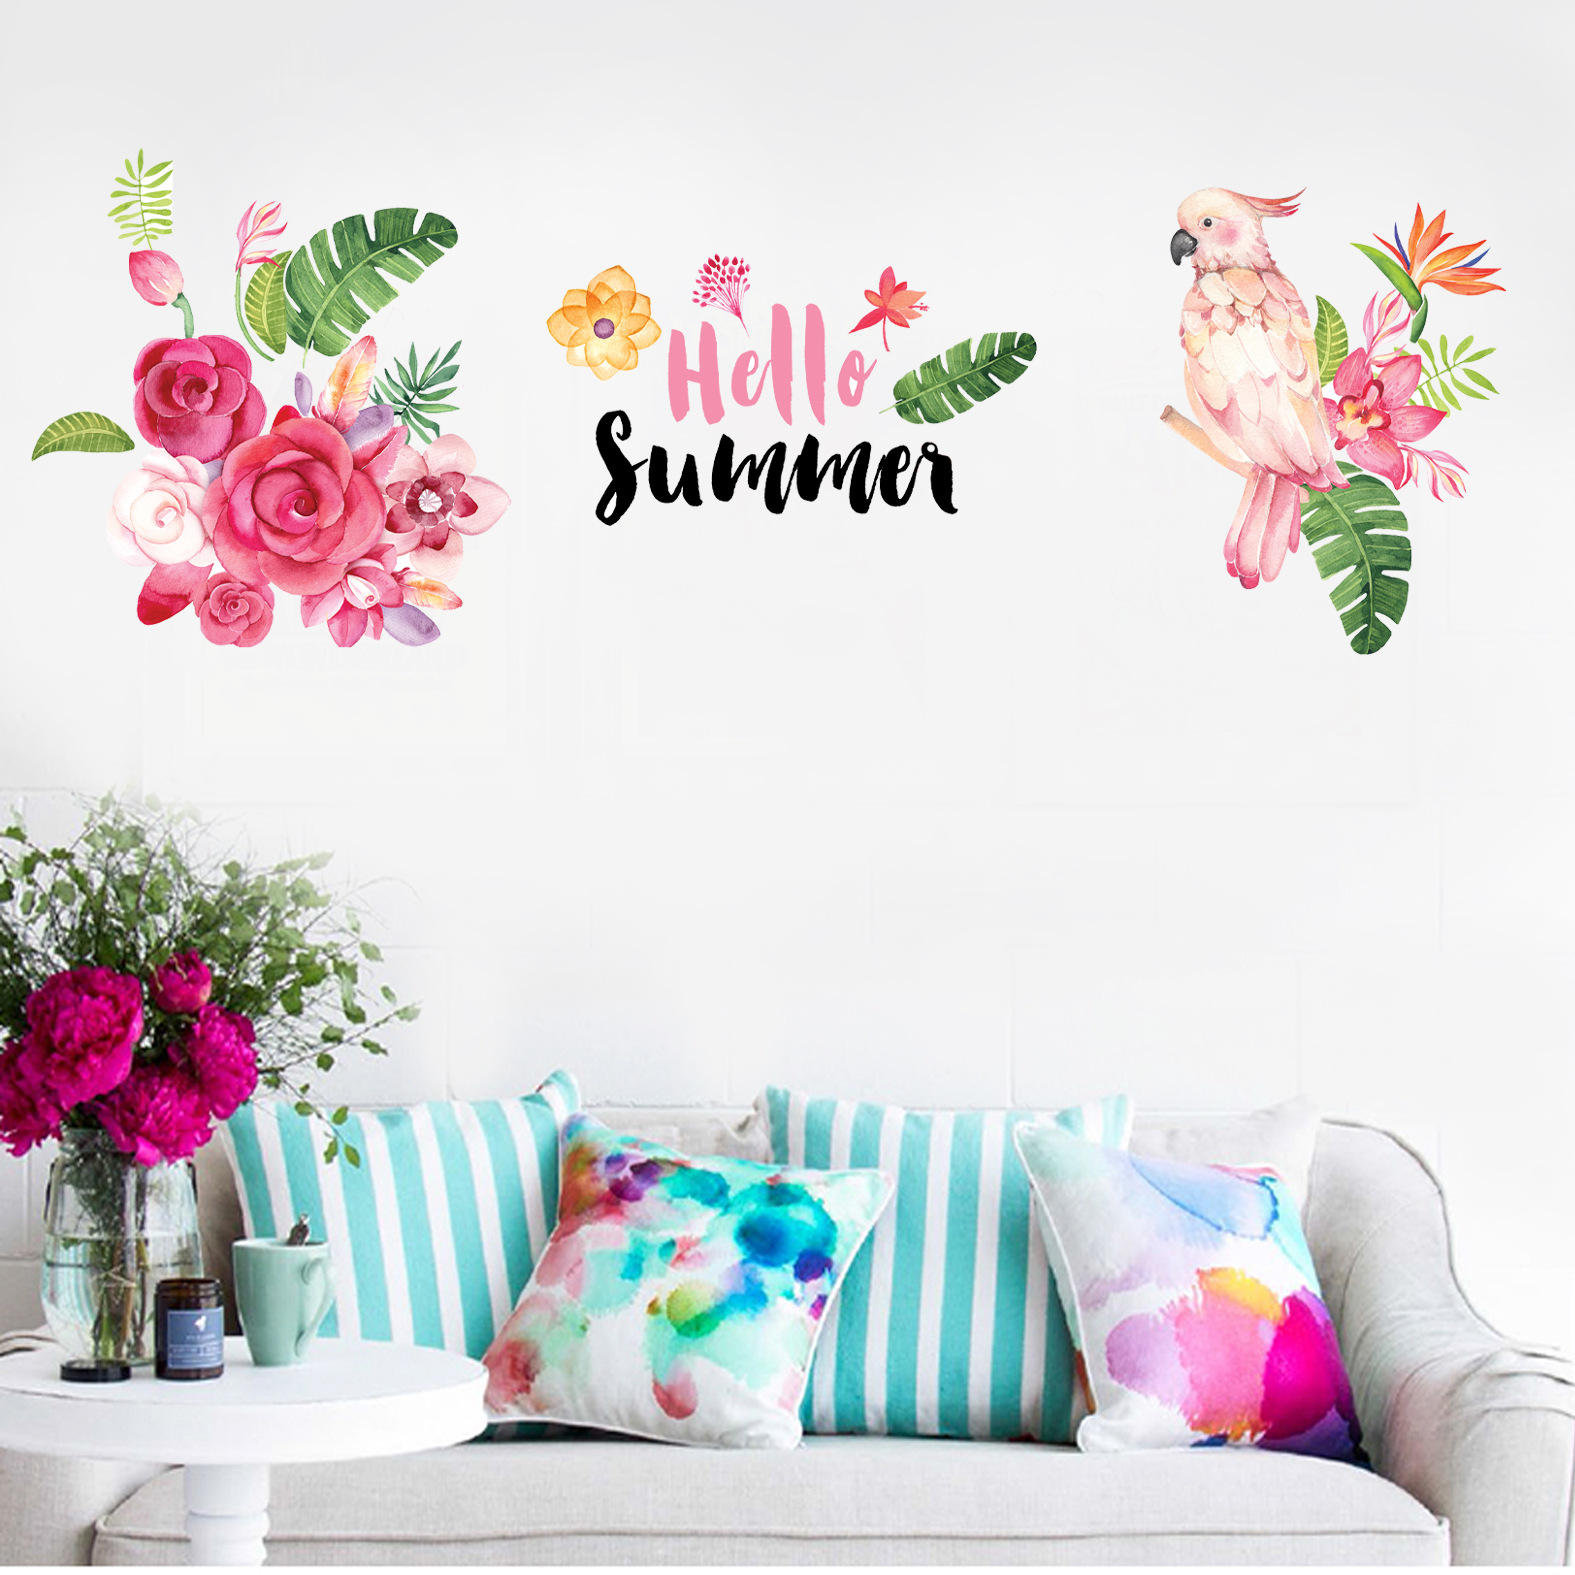 Miico Creative Colorful Summer Parrot Flowers PVC Removable Home Room Decorative Wall Door Decor Sticker